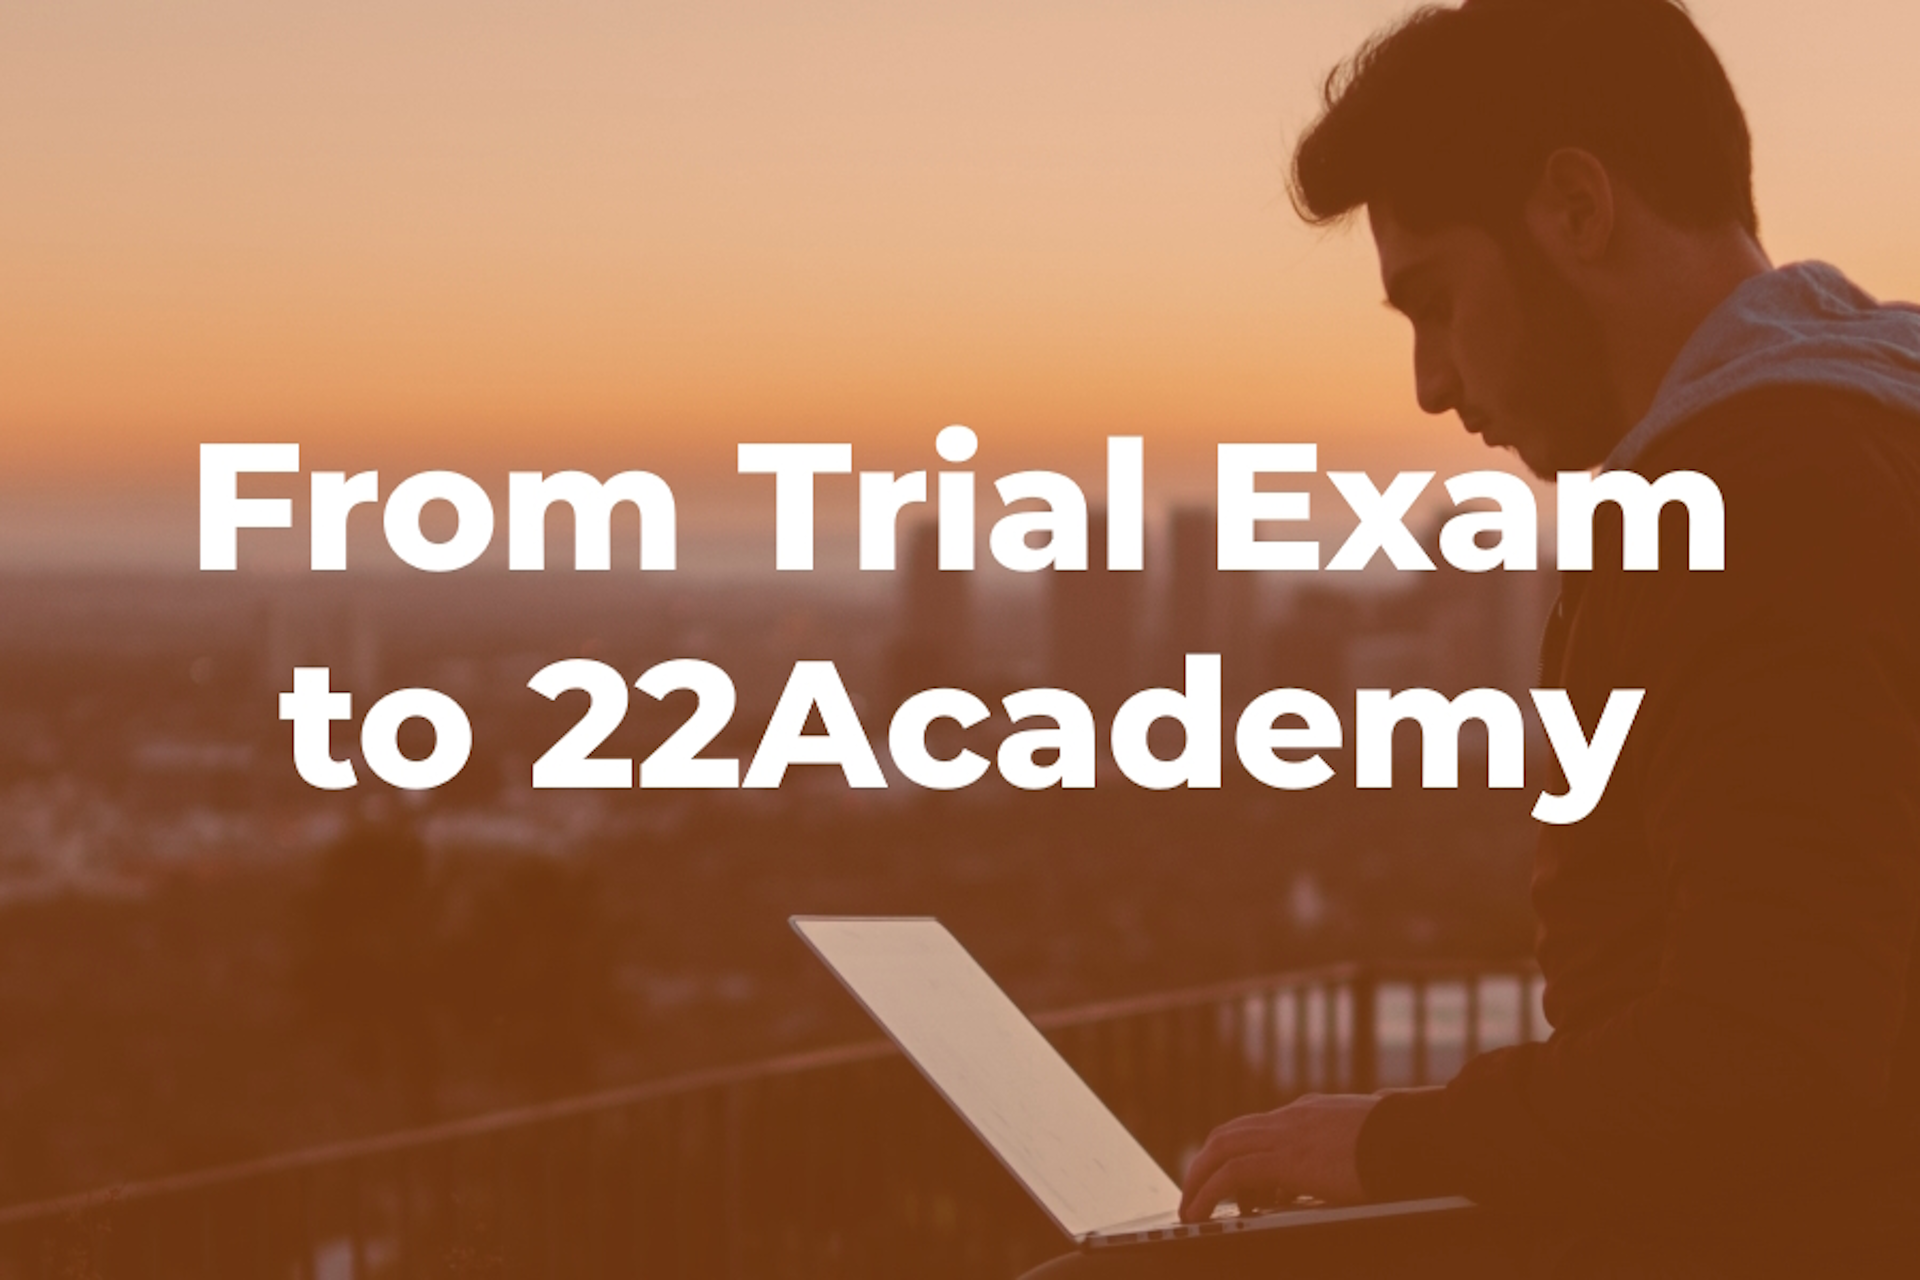 From Trial Exam to 22Academy